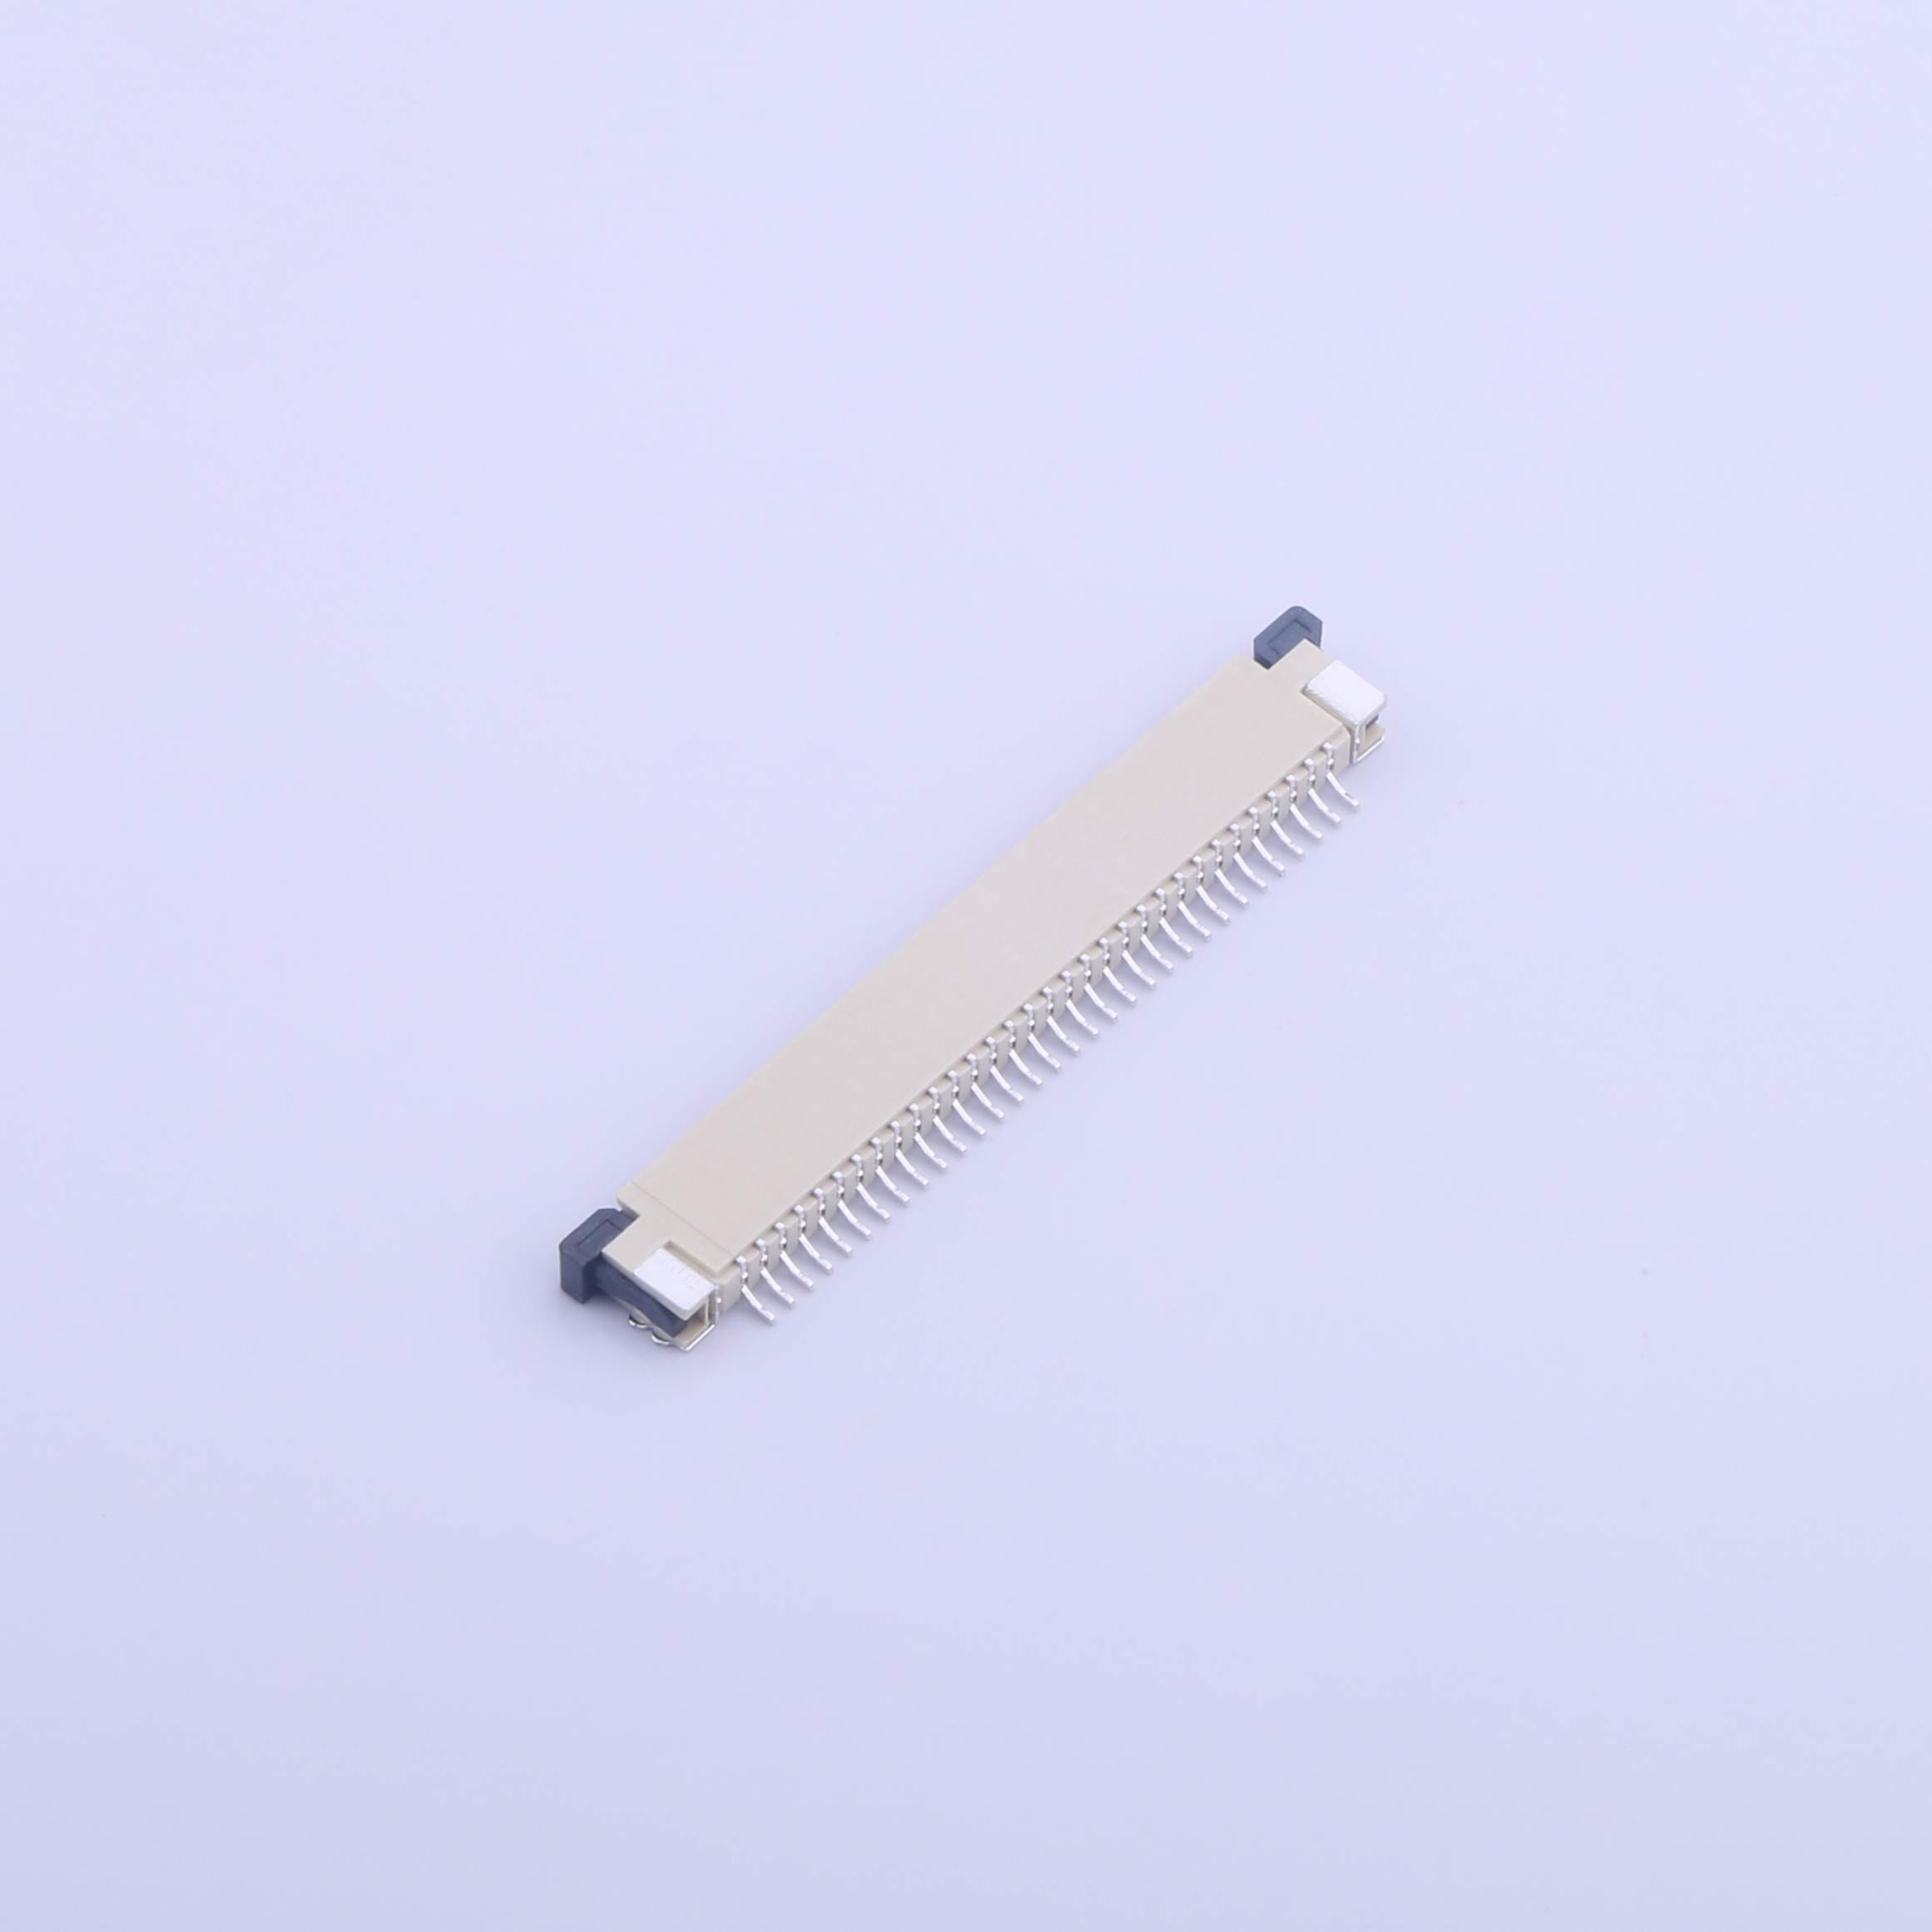 Kinghelm FFC/FPC Connector  32P Pitch 1mm -  KH-CL1.0-H2.5-32ps